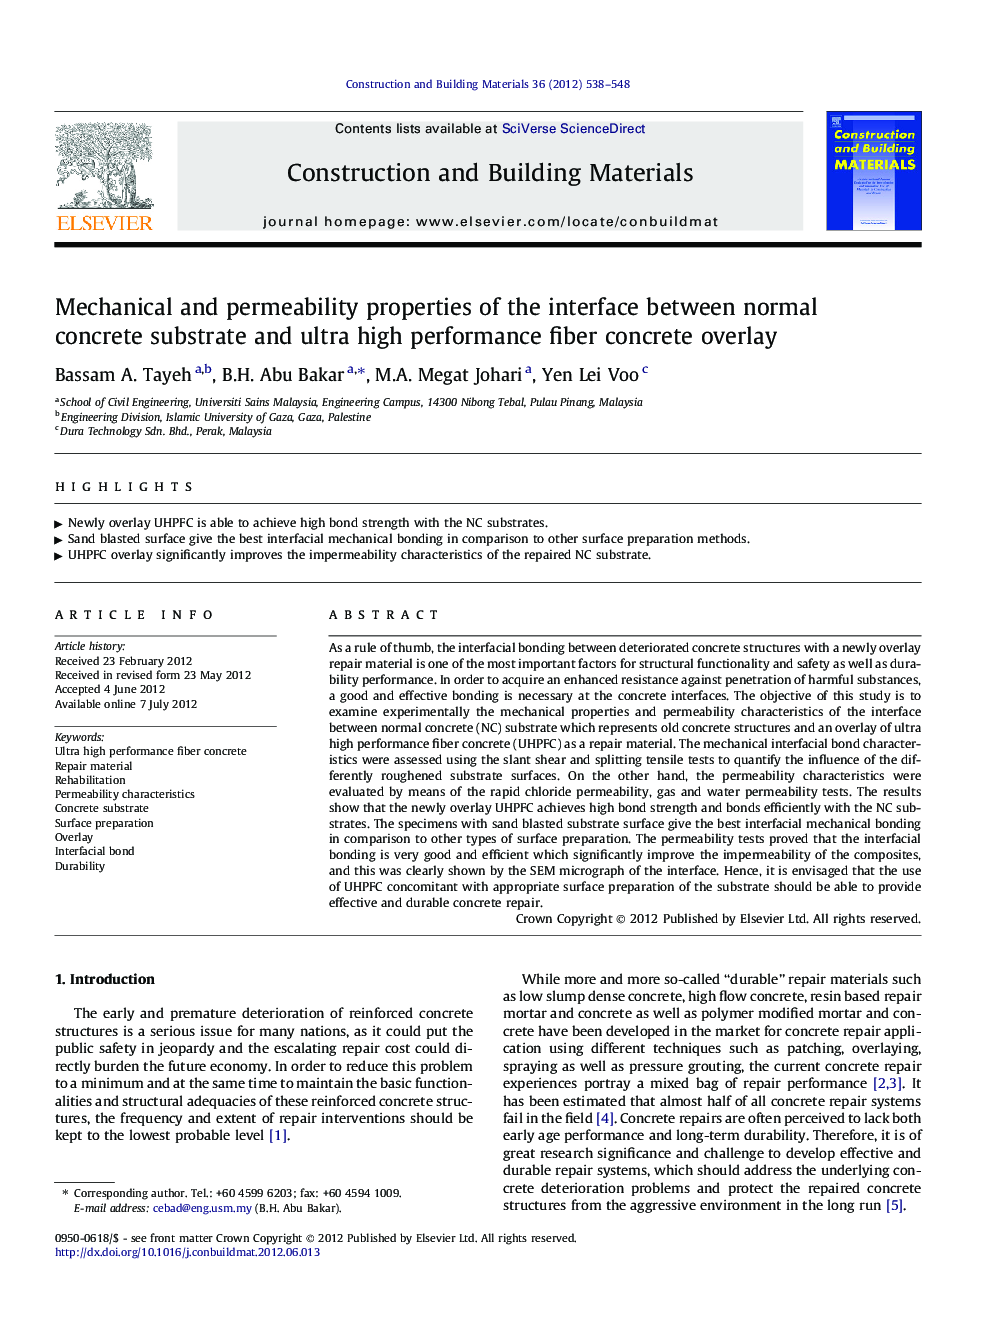 Mechanical and permeability properties of the interface between normal concrete substrate and ultra high performance fiber concrete overlay